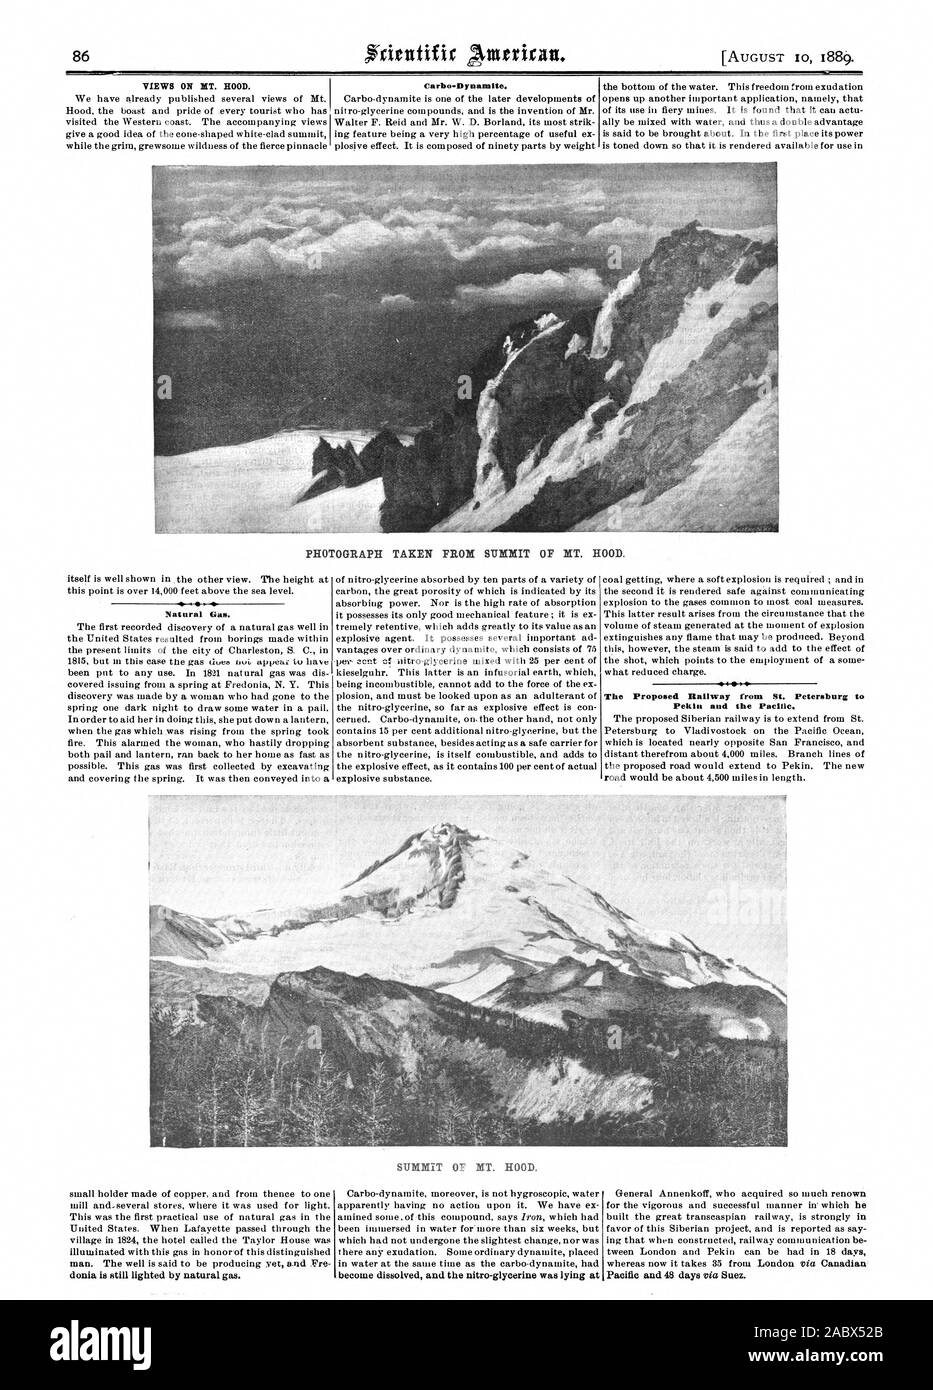 VIEWS ON MT. HOOD. Carbo-Dynamite. PHOTOGRAPH TAKEN FROM SUMMIT OF MT. HOOD. Natural Gas. The Proposed Railway from St. Petersburg t Pekin and the Pacific. SUMMIT OF MT. HOOD., scientific american, 1889-08-10 Stock Photo